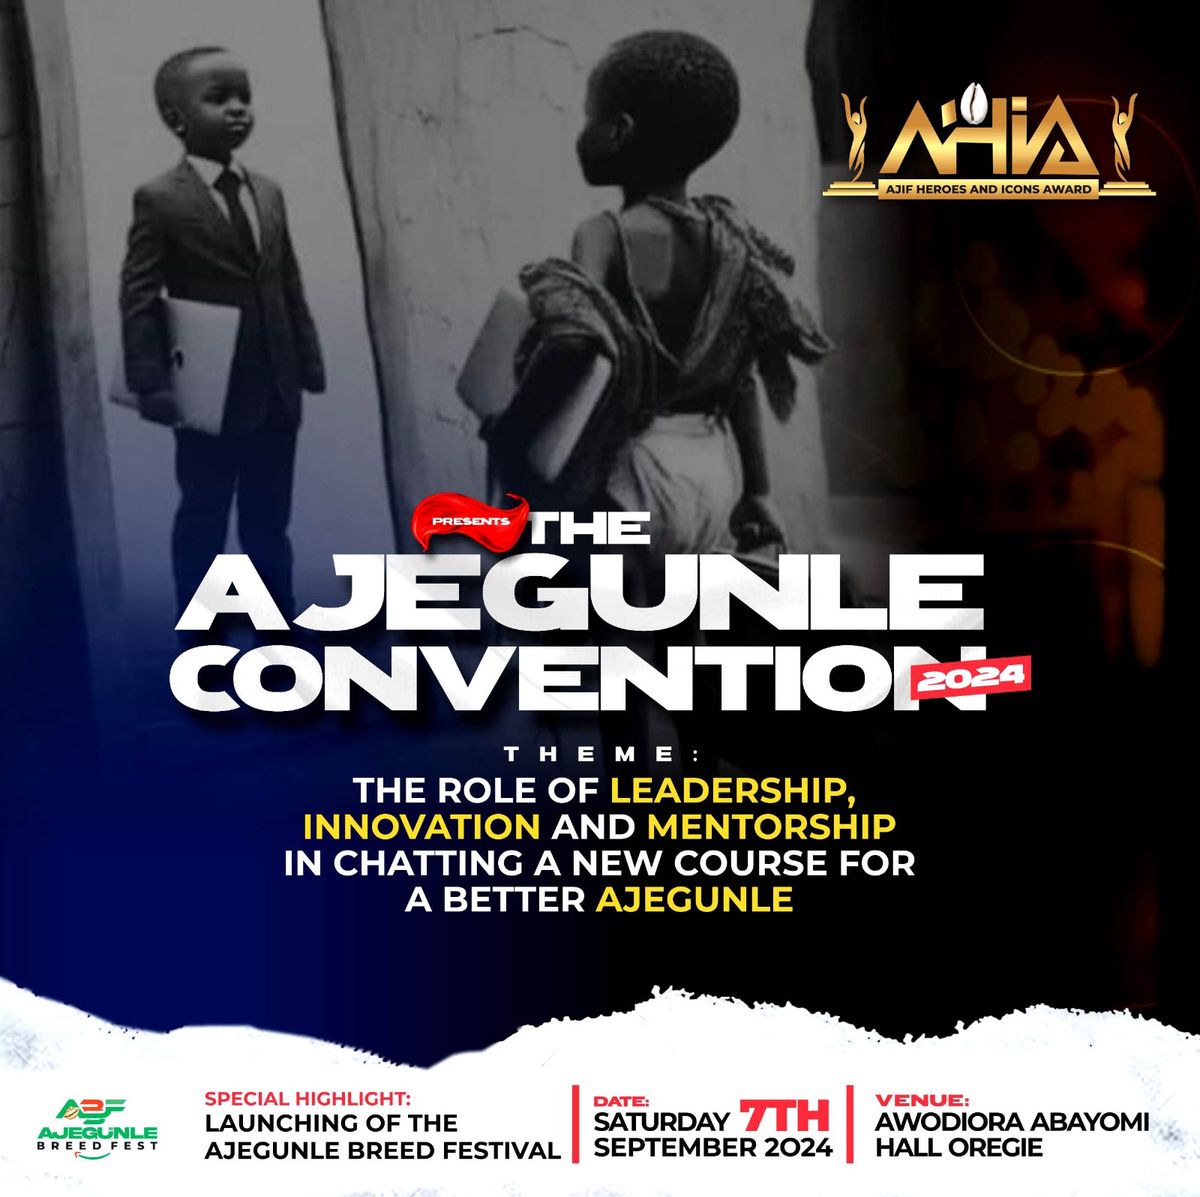 Ajegunle Convention 2024